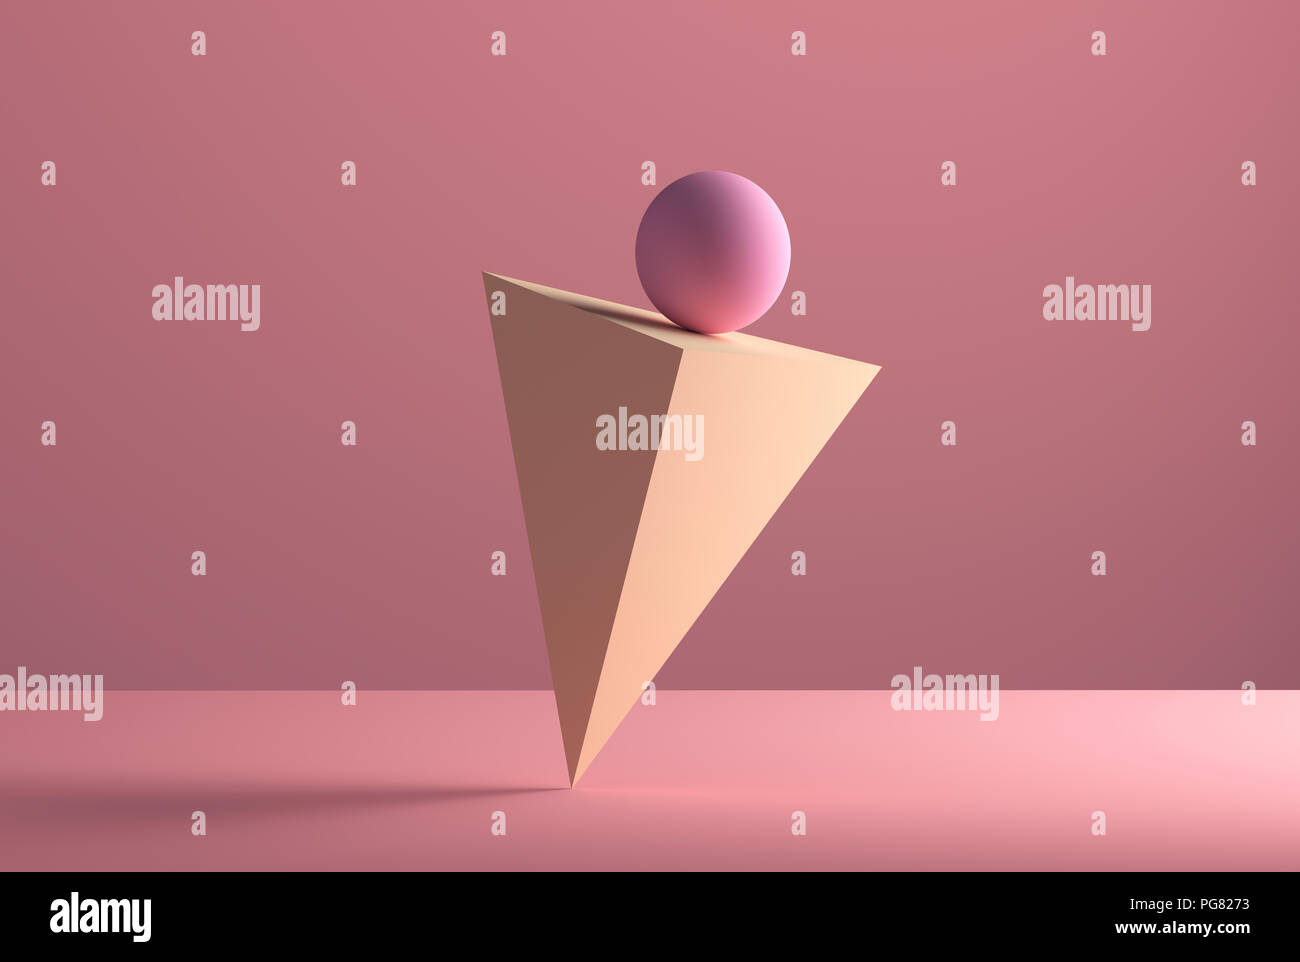 Sphere balancing on the edge of a pyramid, 3D Rendering Stock Photo